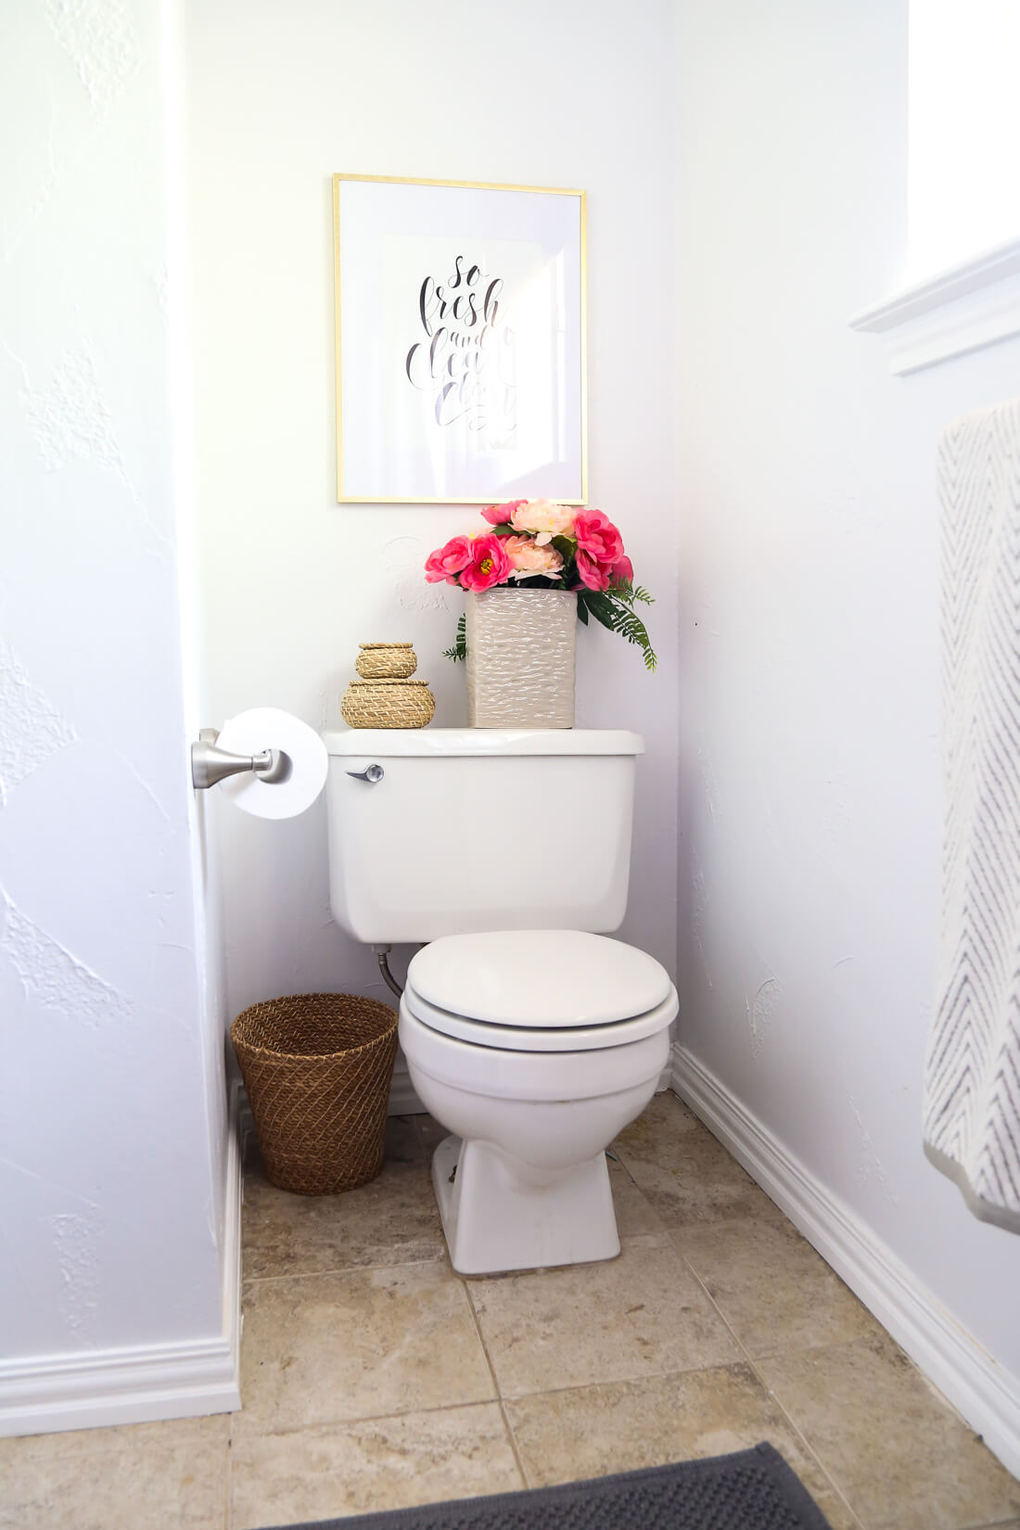 aA DIY modern, serene bathroom renovation that can be completed in a weekend. Great ideas for how to upgrade an ugly bathroom and make it look like new without a ton of time or money. 